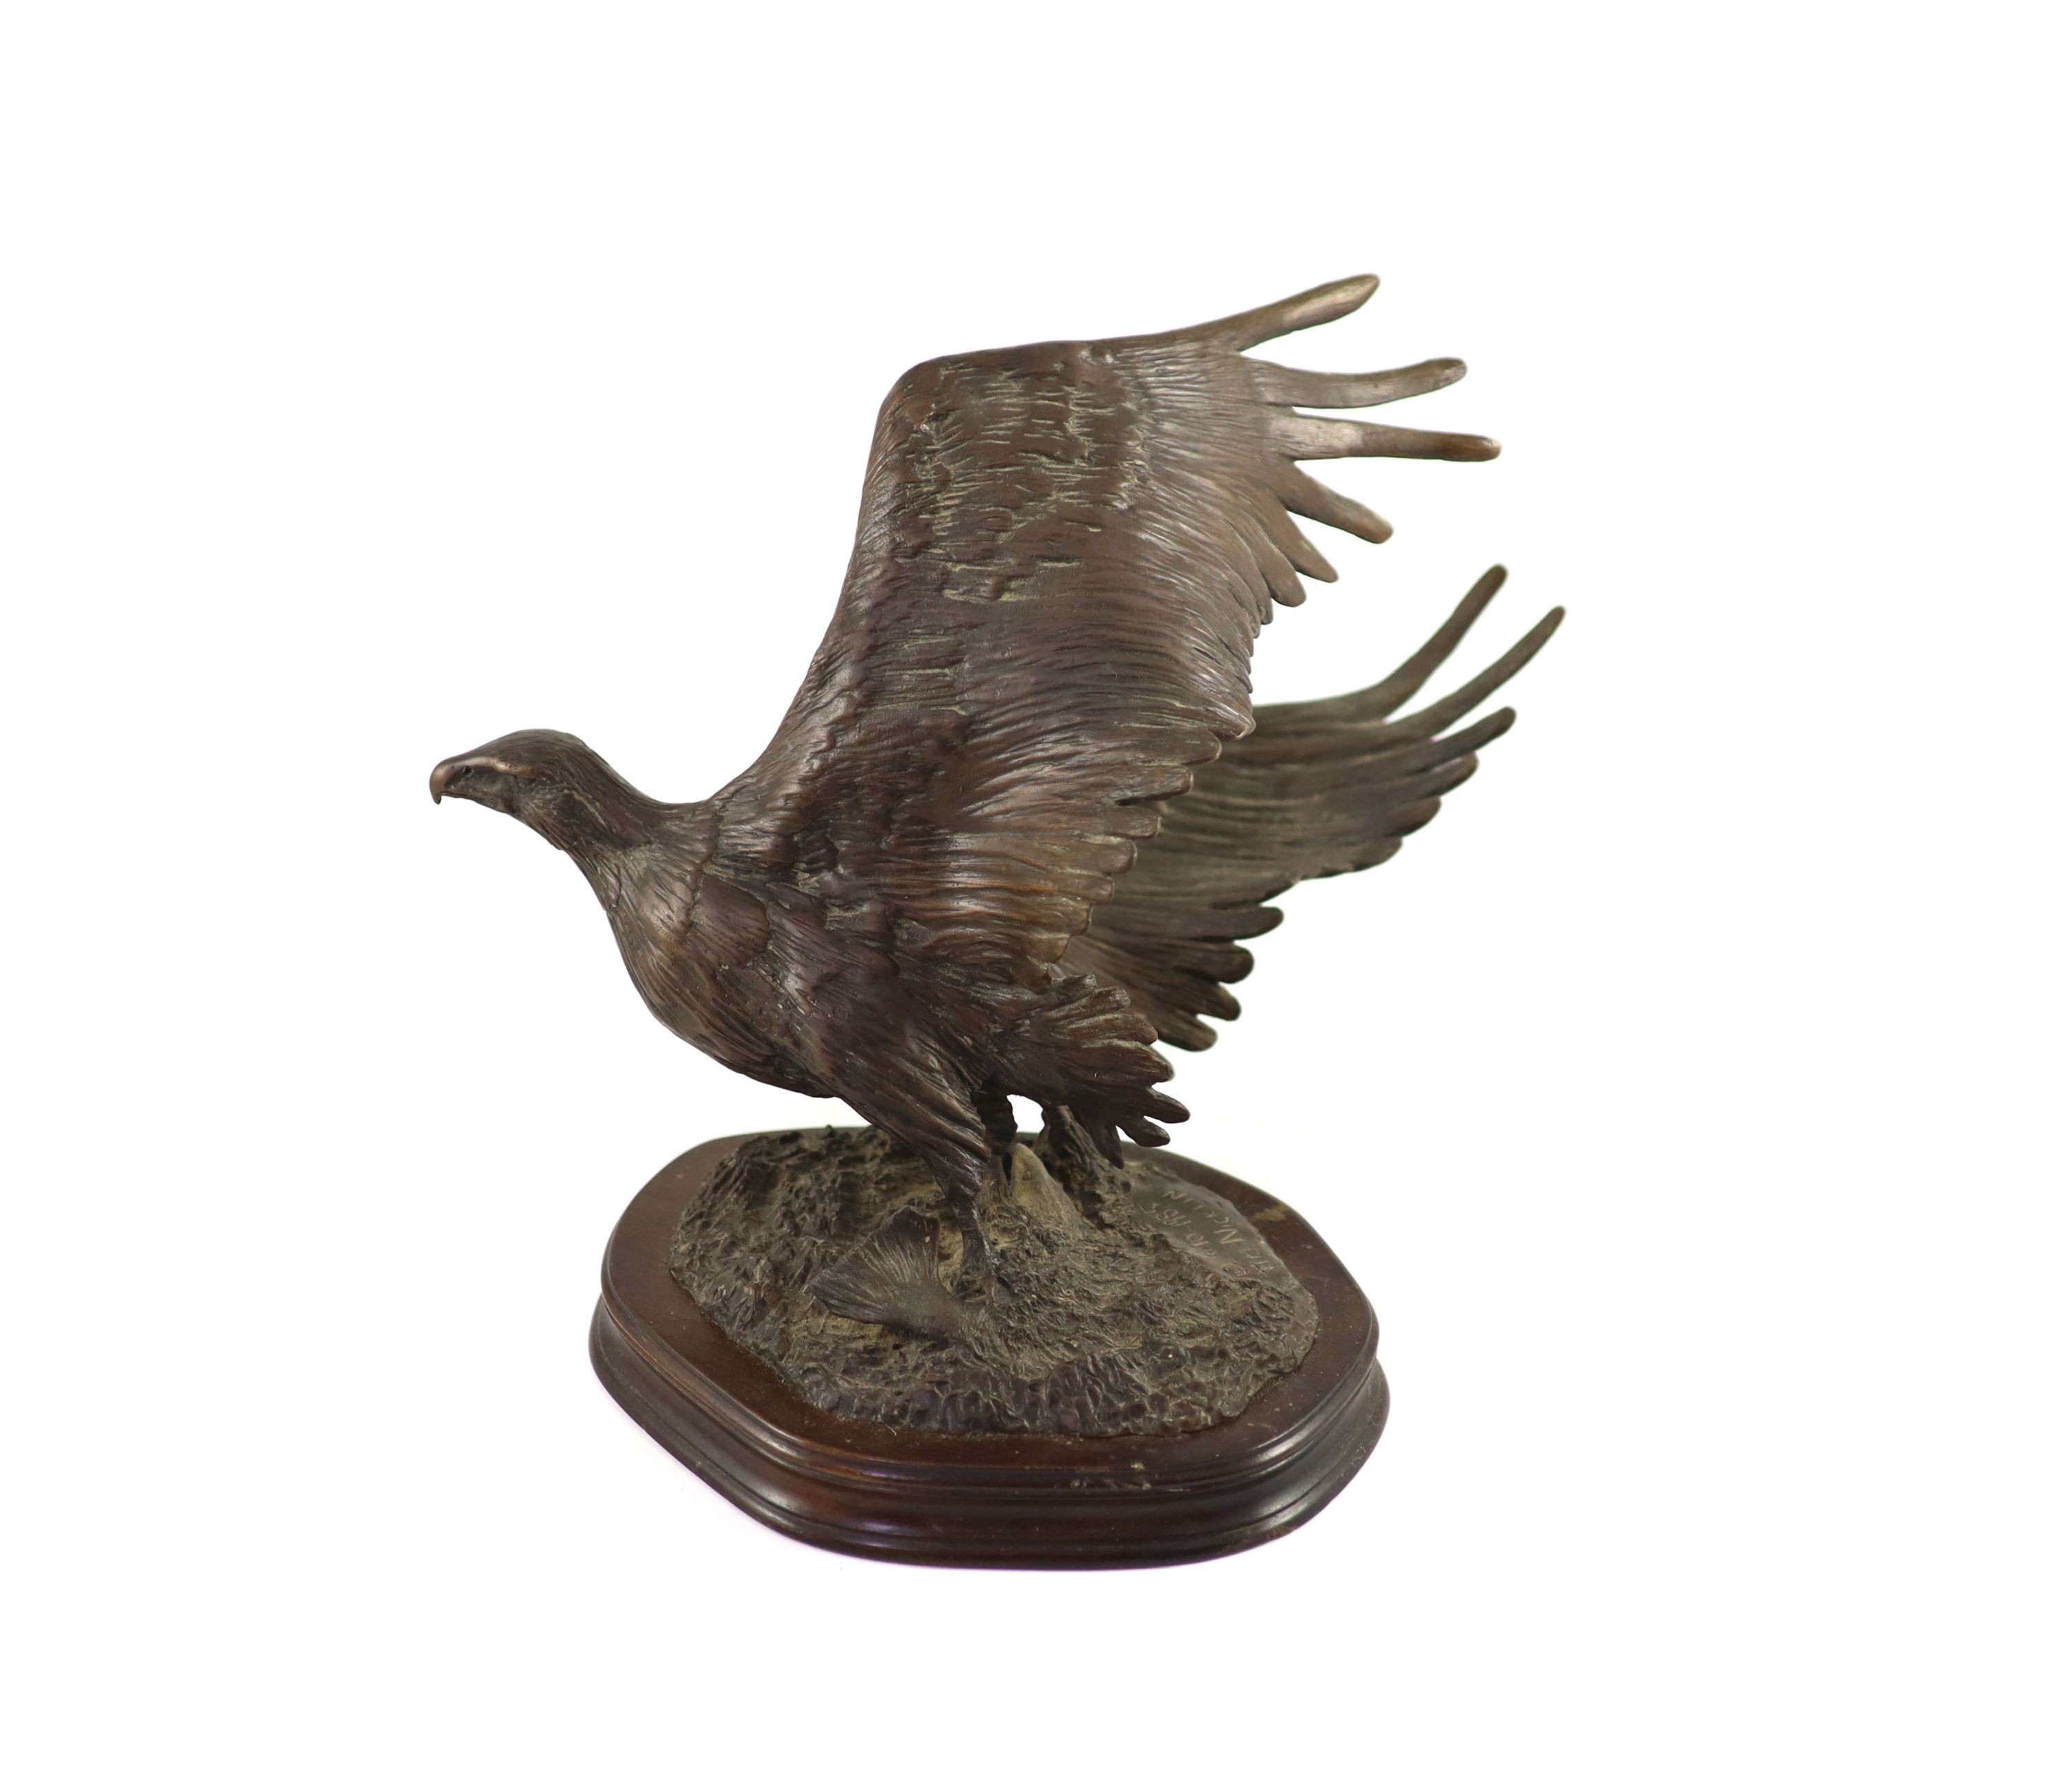 Tim Nicklin. A bronze model of an Osprey catching a salmonon naturalistic base, signed and dated